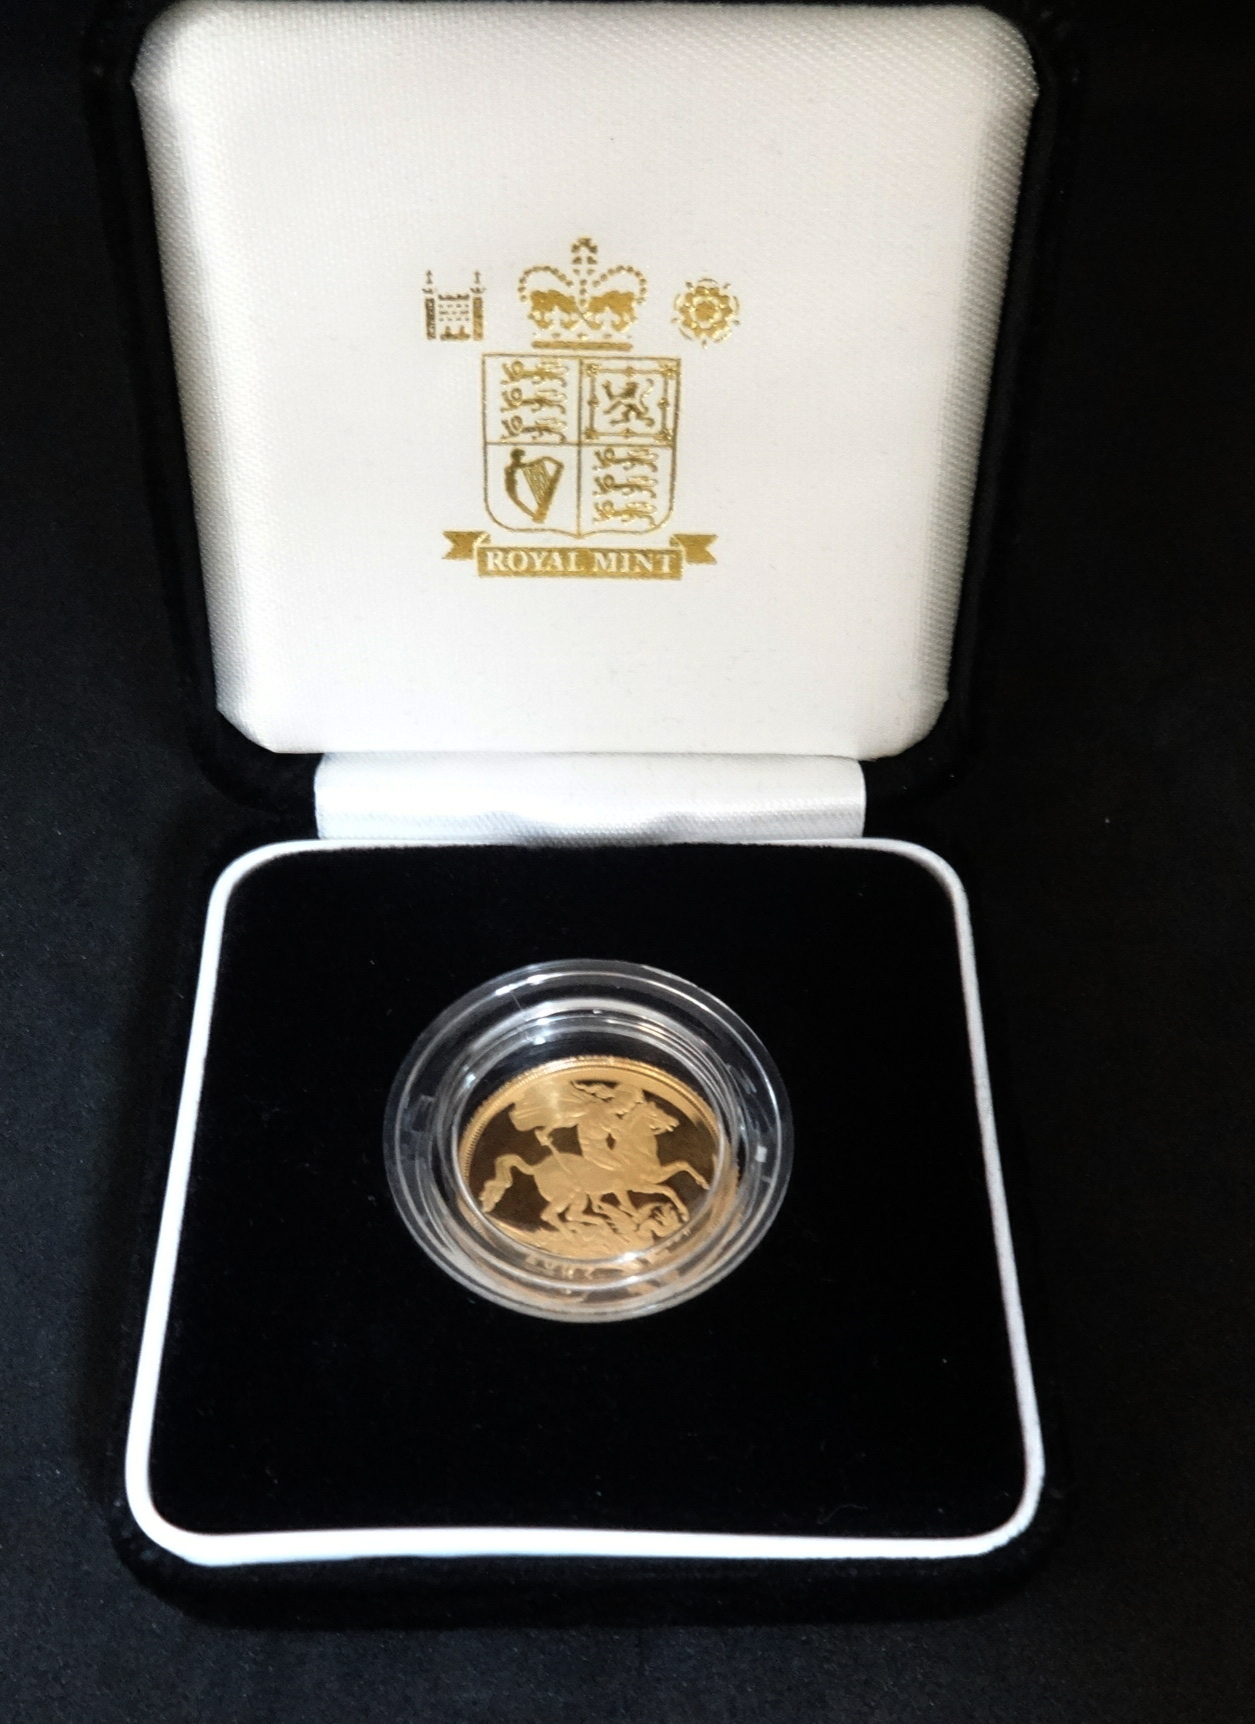 Royal Mint, 2007 gold proof sovereign, boxed with certificate.